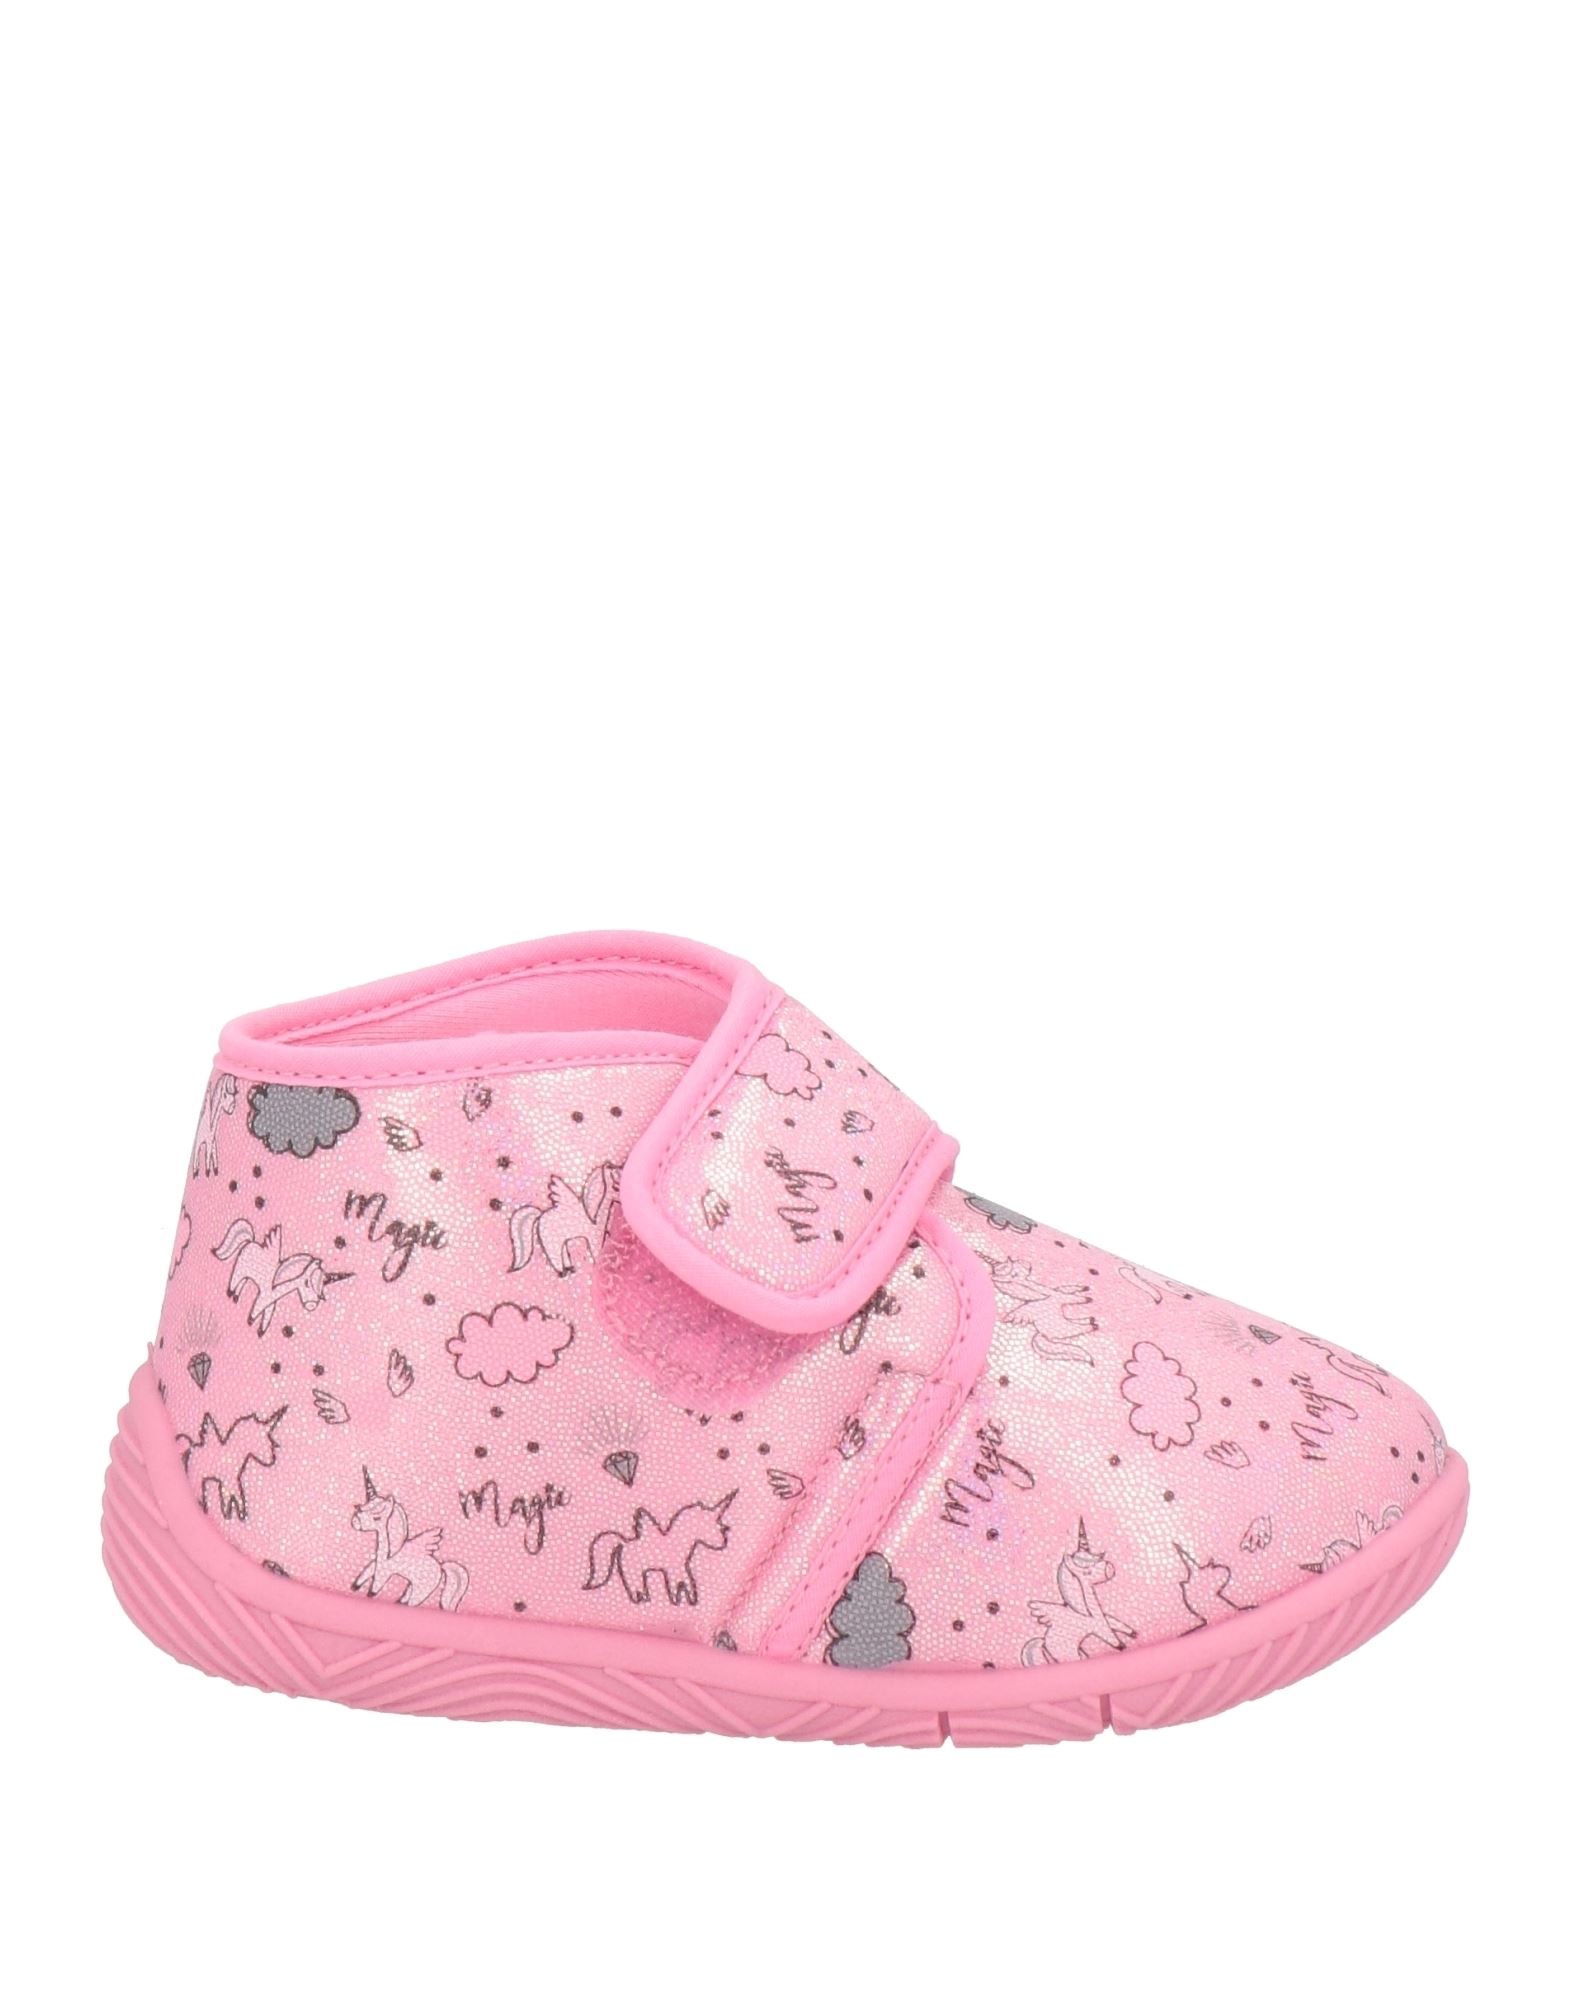 CHICCO Hausschuh Kinder Rosa von CHICCO